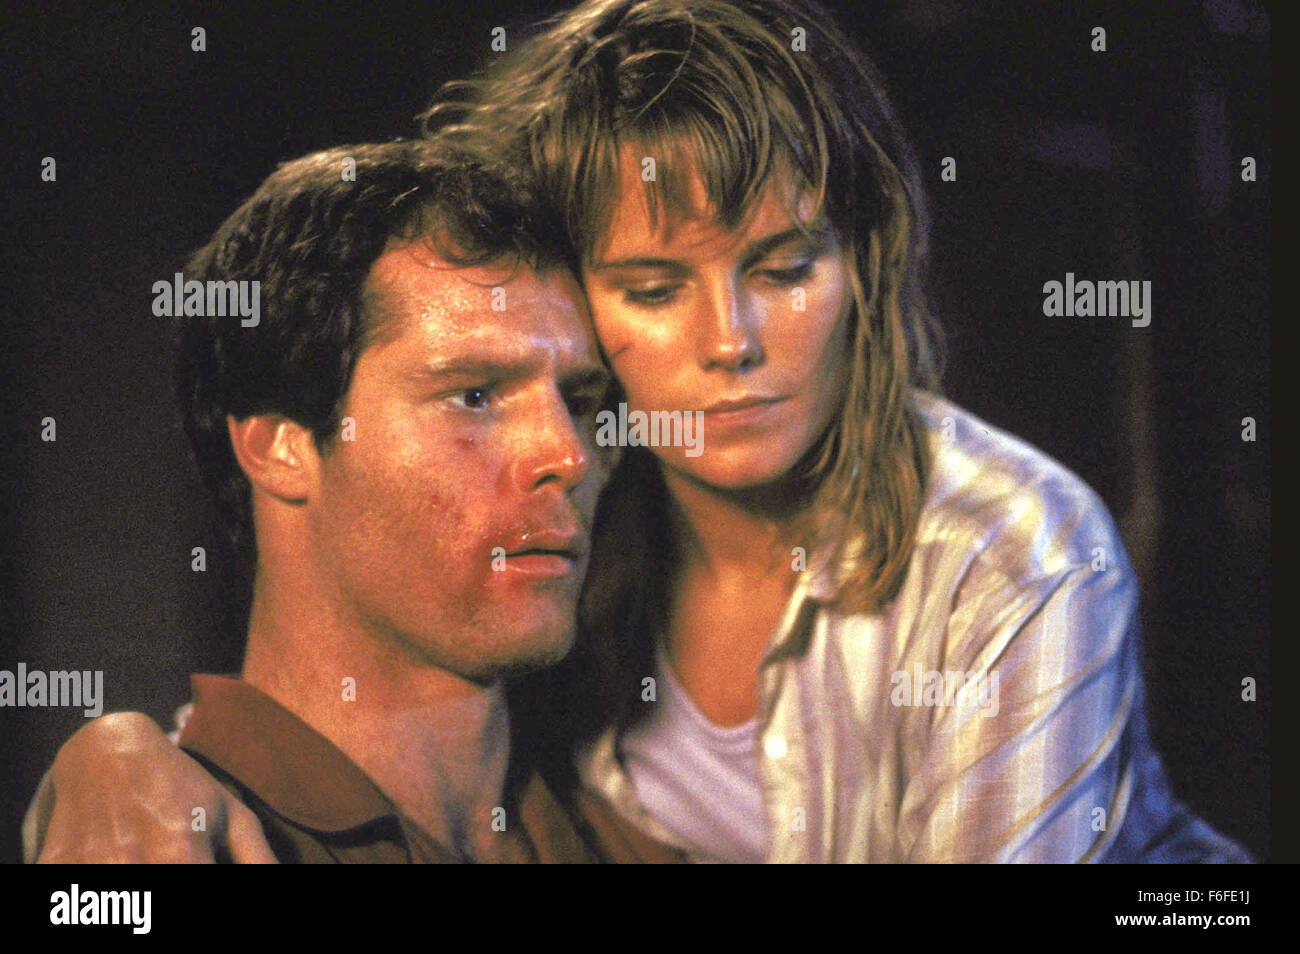 Jul 29, 1988; Pittsburgh, PA, USA; Actor JASON BEGHE stars as Allan Mann and KATE MCNEIL as Melanie Parker in the George A. Romero directed thriller, 'Monkey Shines.' Stock Photo